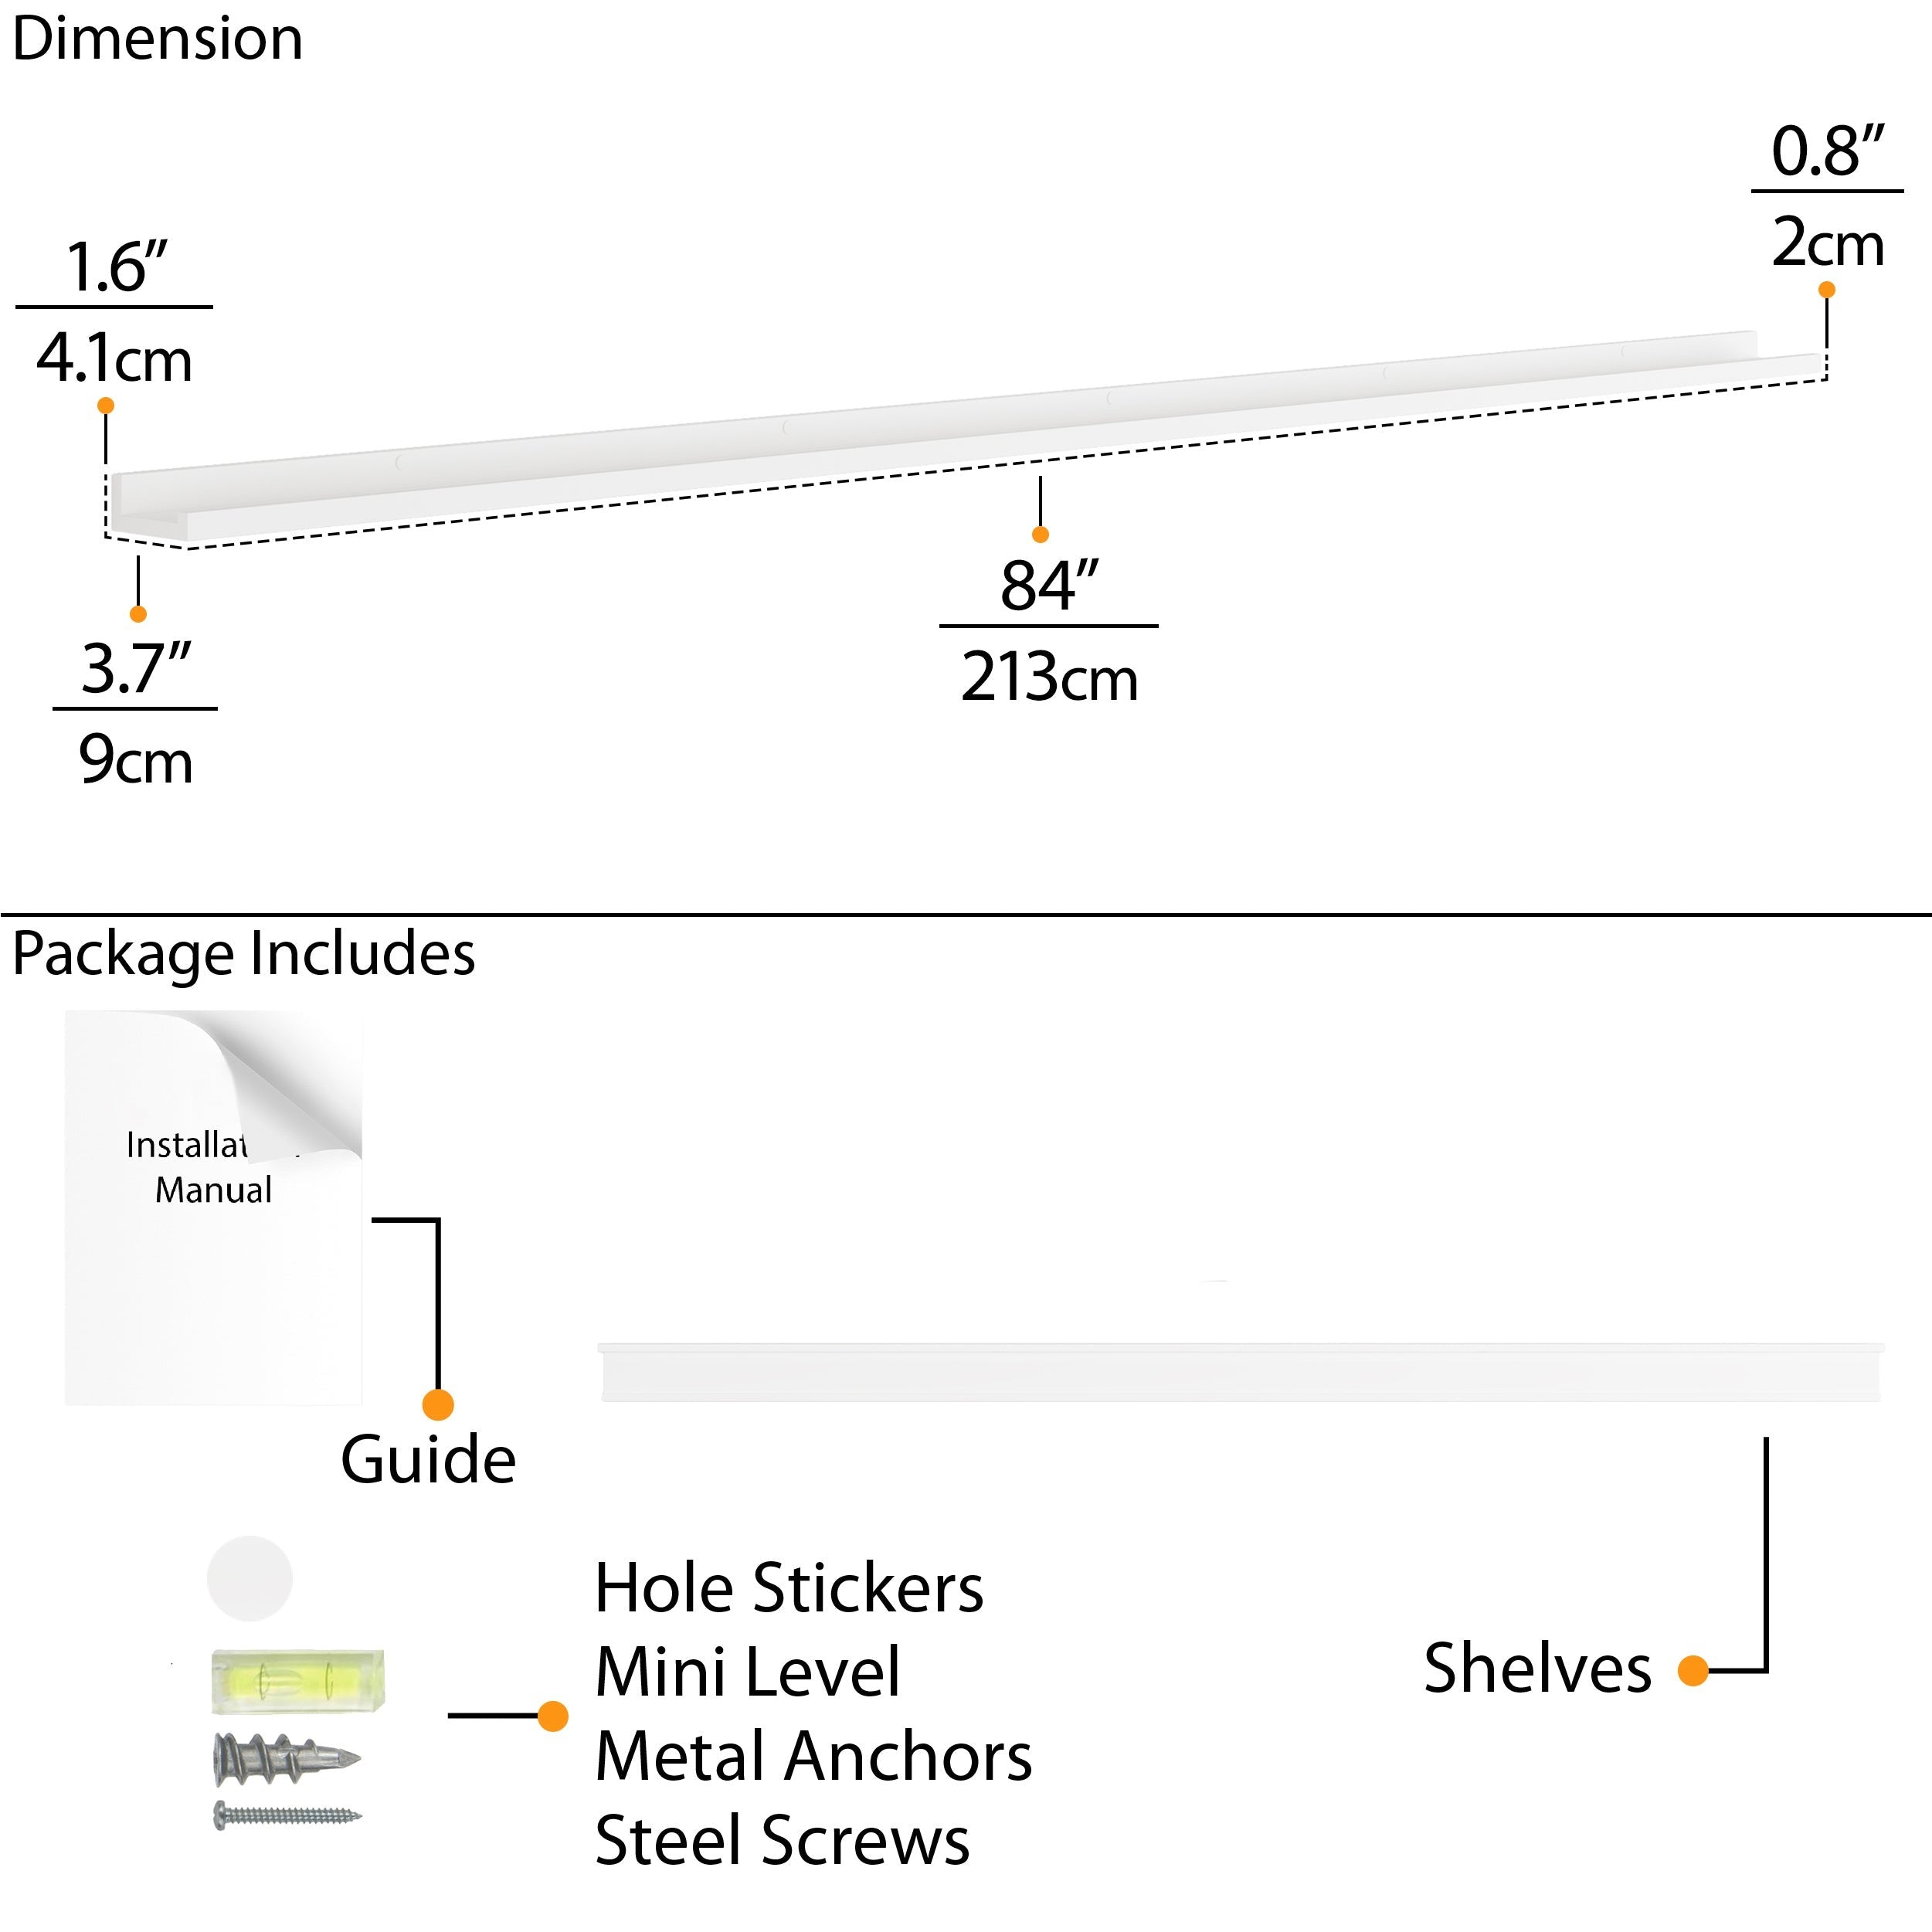 Diagram of 84'' shelf white dimensions and contents of installation package with tools and hardware.